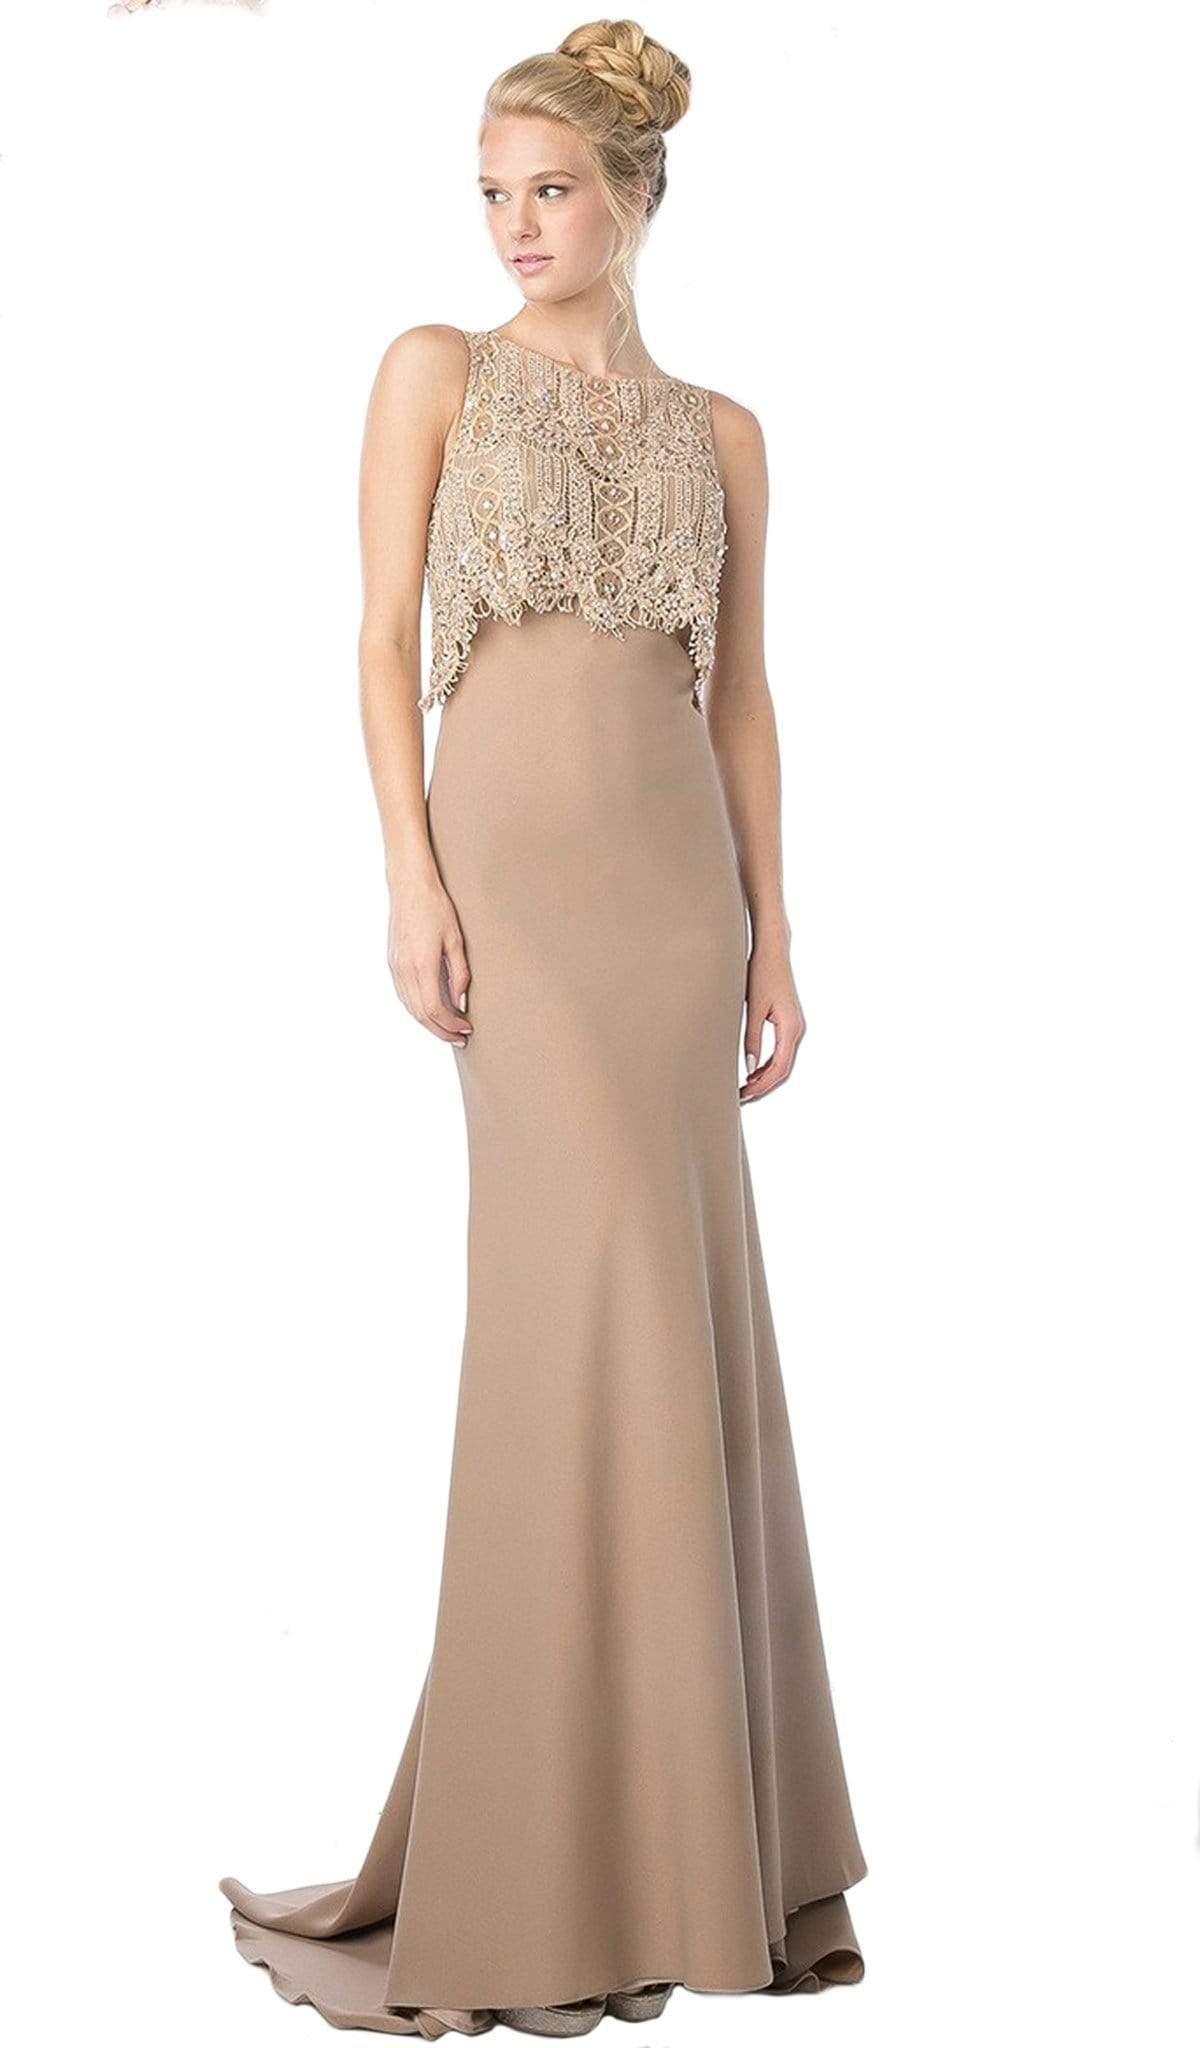 Cinderella Divine - Sleeveless Lace Popover Fitted Evening Gown Special Occasion Dress